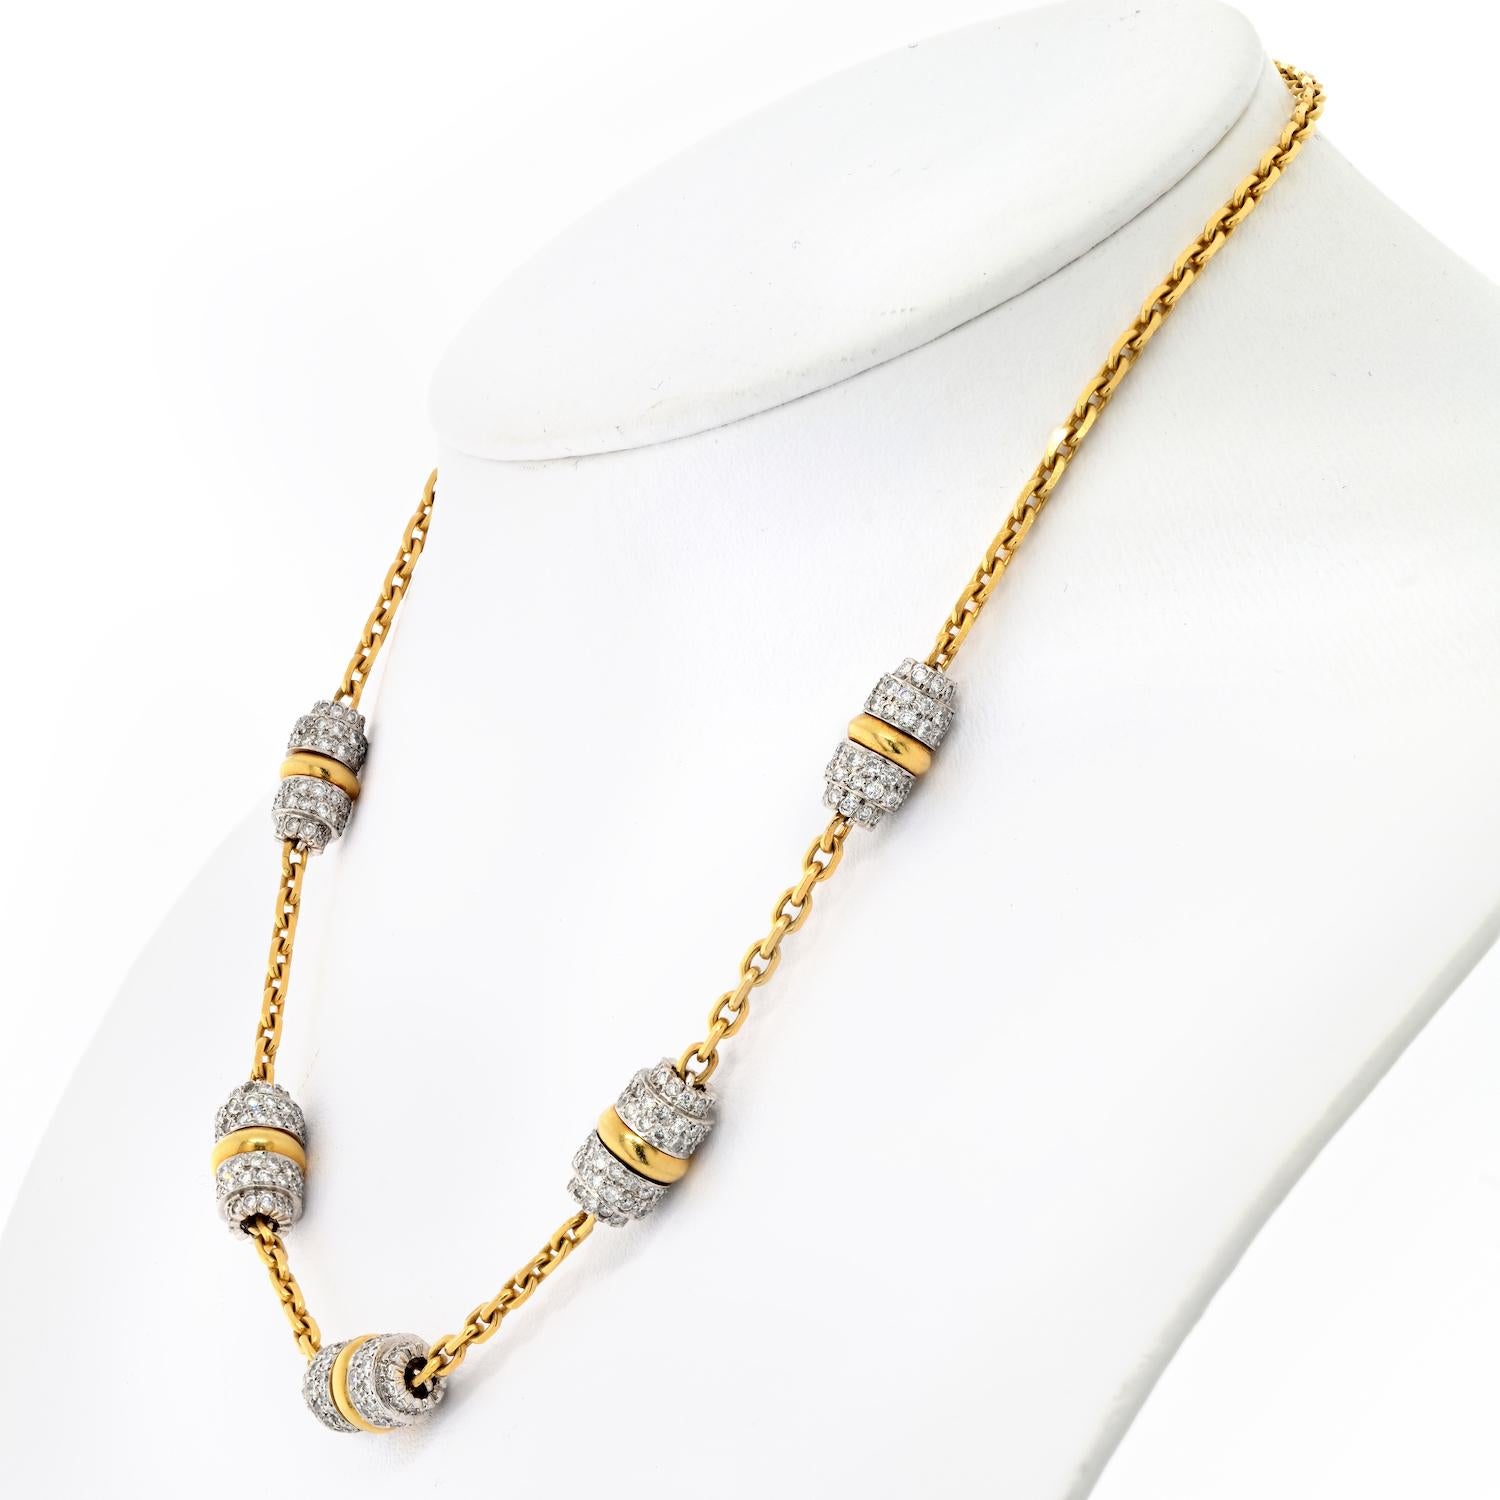 The David Webb 18k Yellow Gold and Platinum Night Cap Chan Necklace is a stunning piece of jewelry that exudes elegance and luxury. This necklace features five 